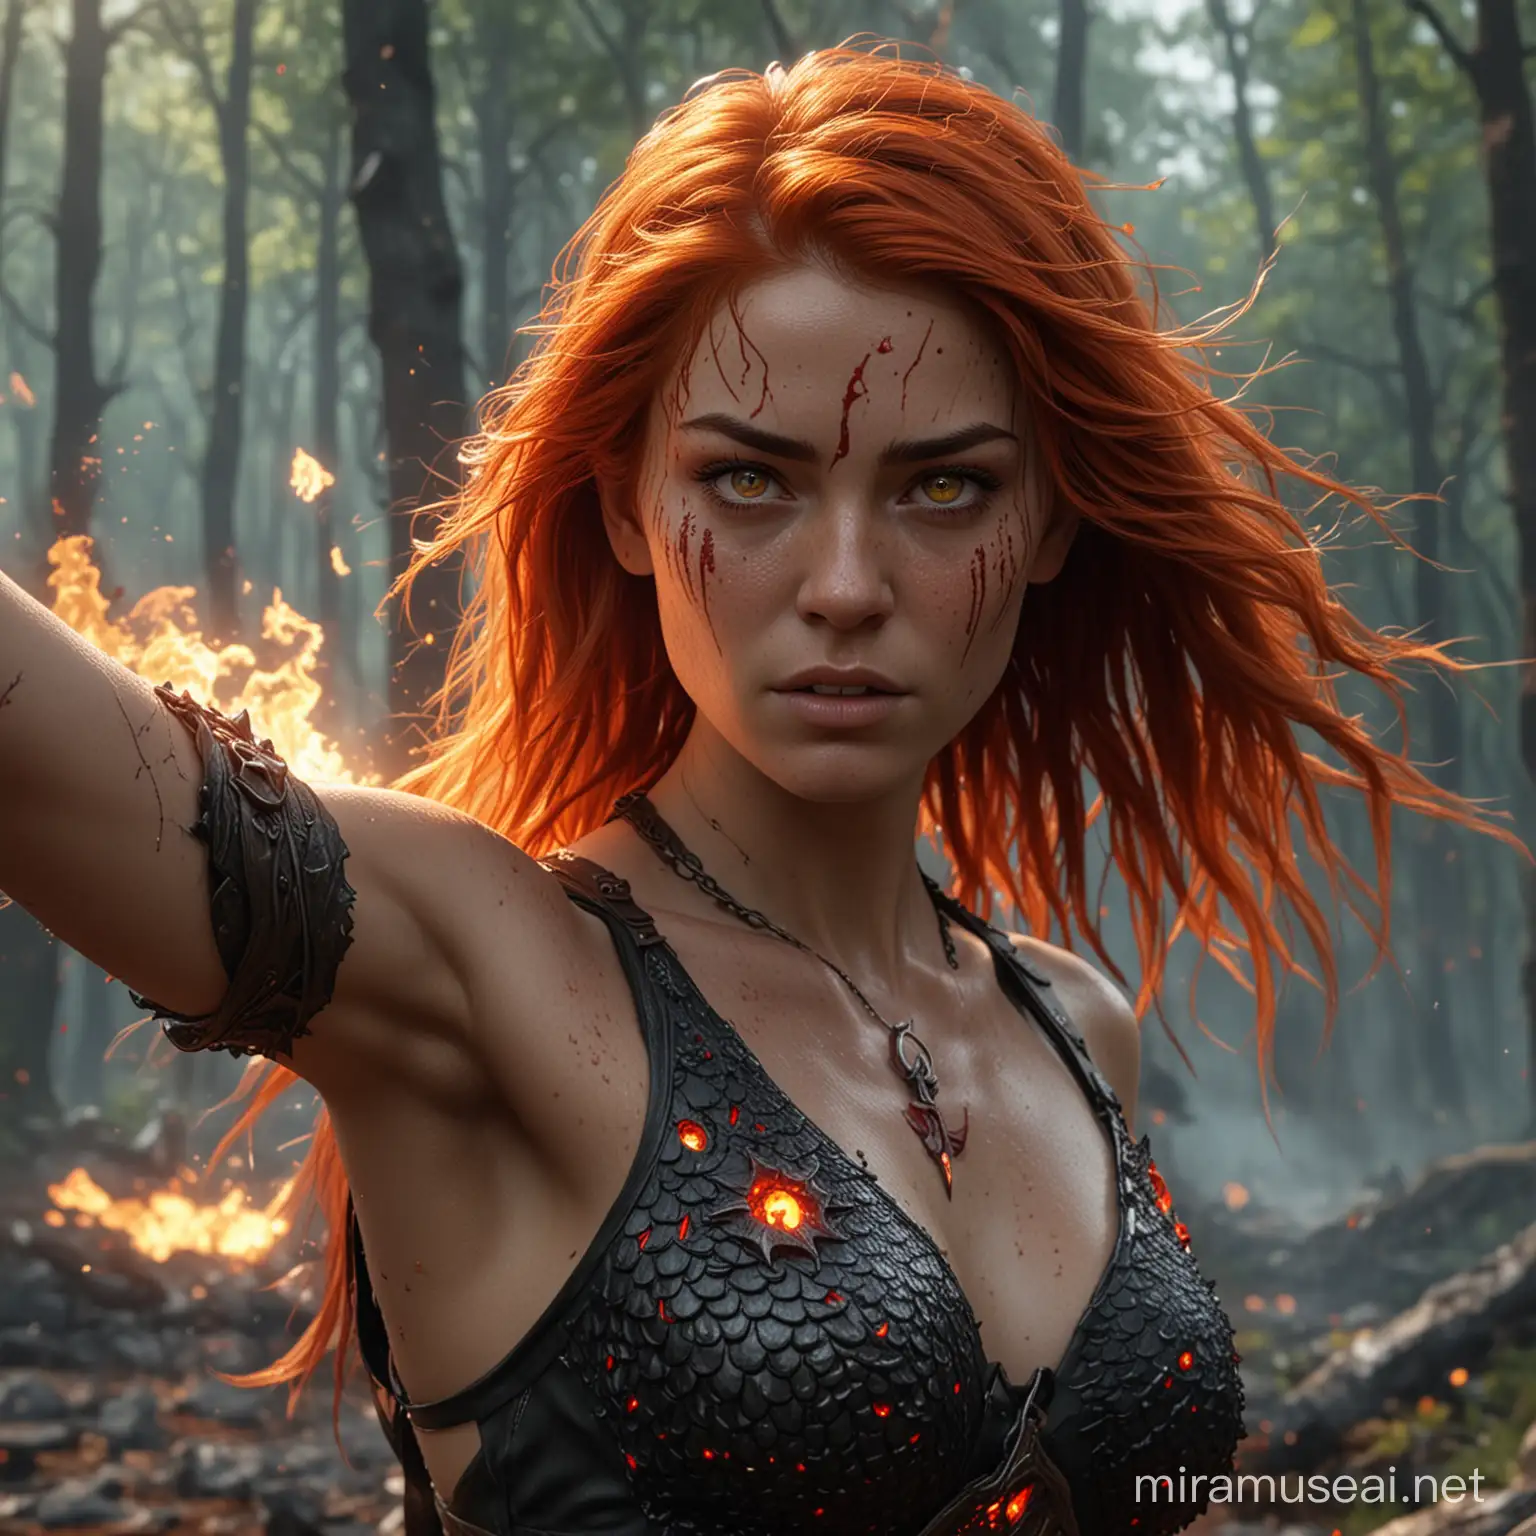 Fiery RedHaired Woman in Dragon Scale Armor Conjuring Lightning in Forest Battle